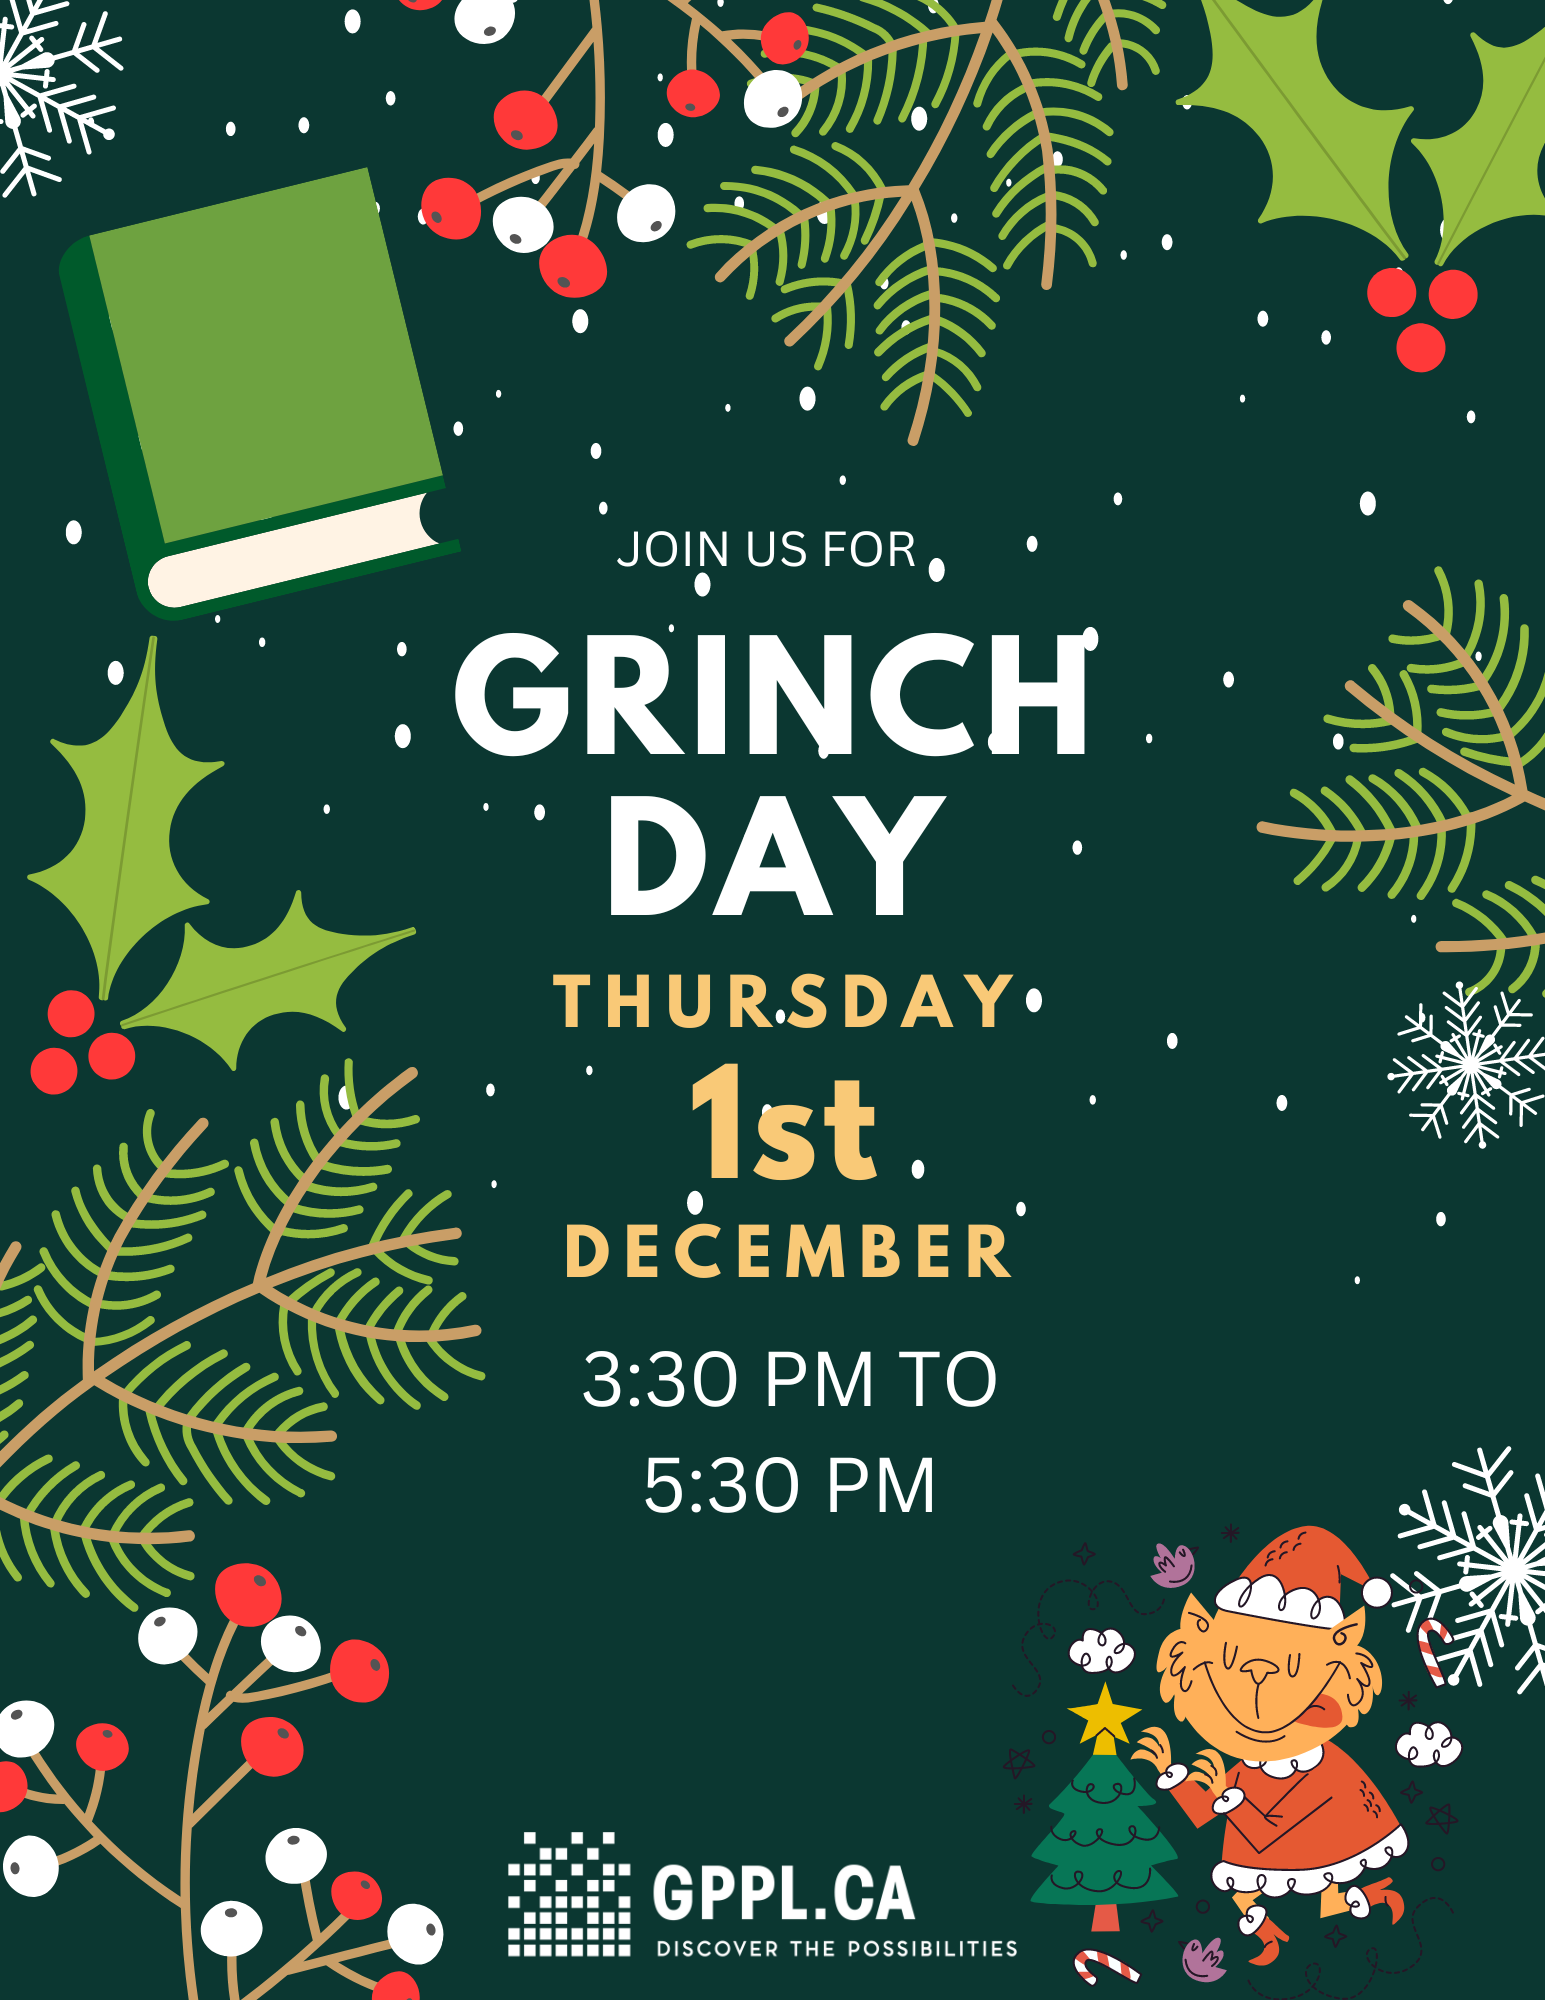 Grinch day poster with date and information. Has snowflakes and a book.